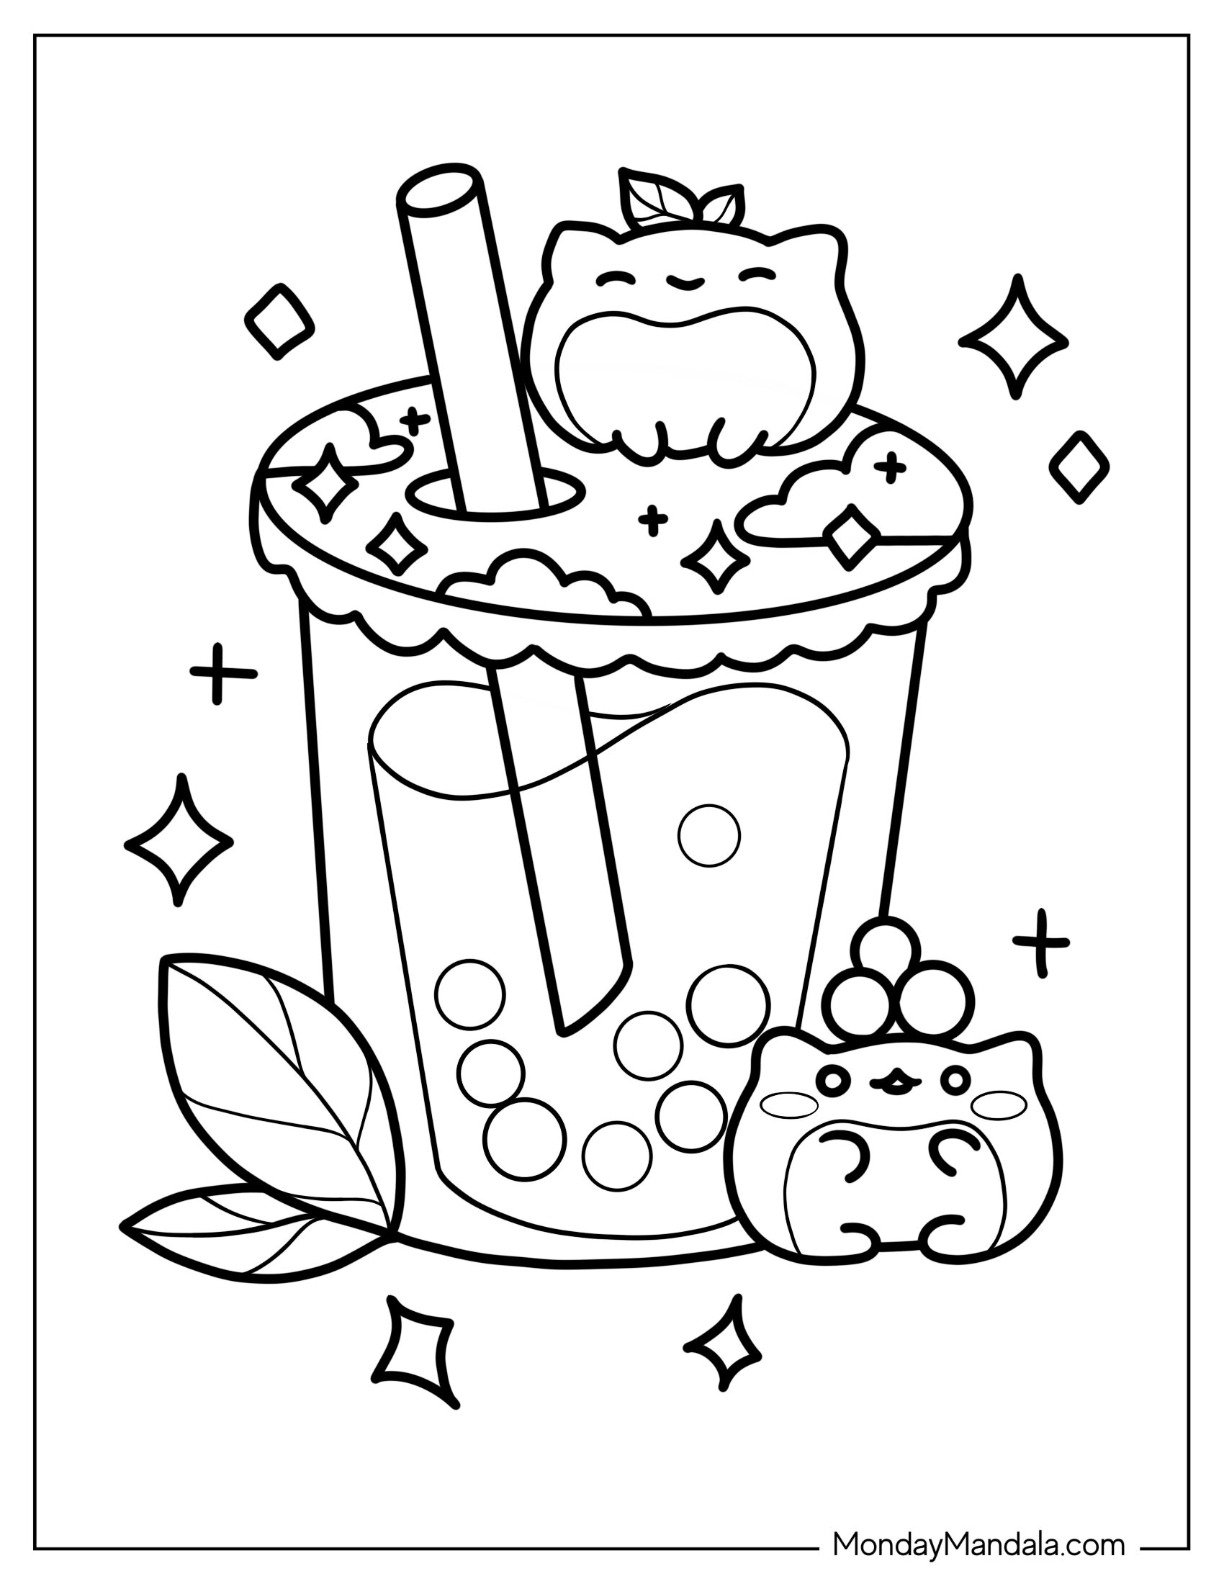 Creative Boba Coloring Pages For Fun And Relaxation